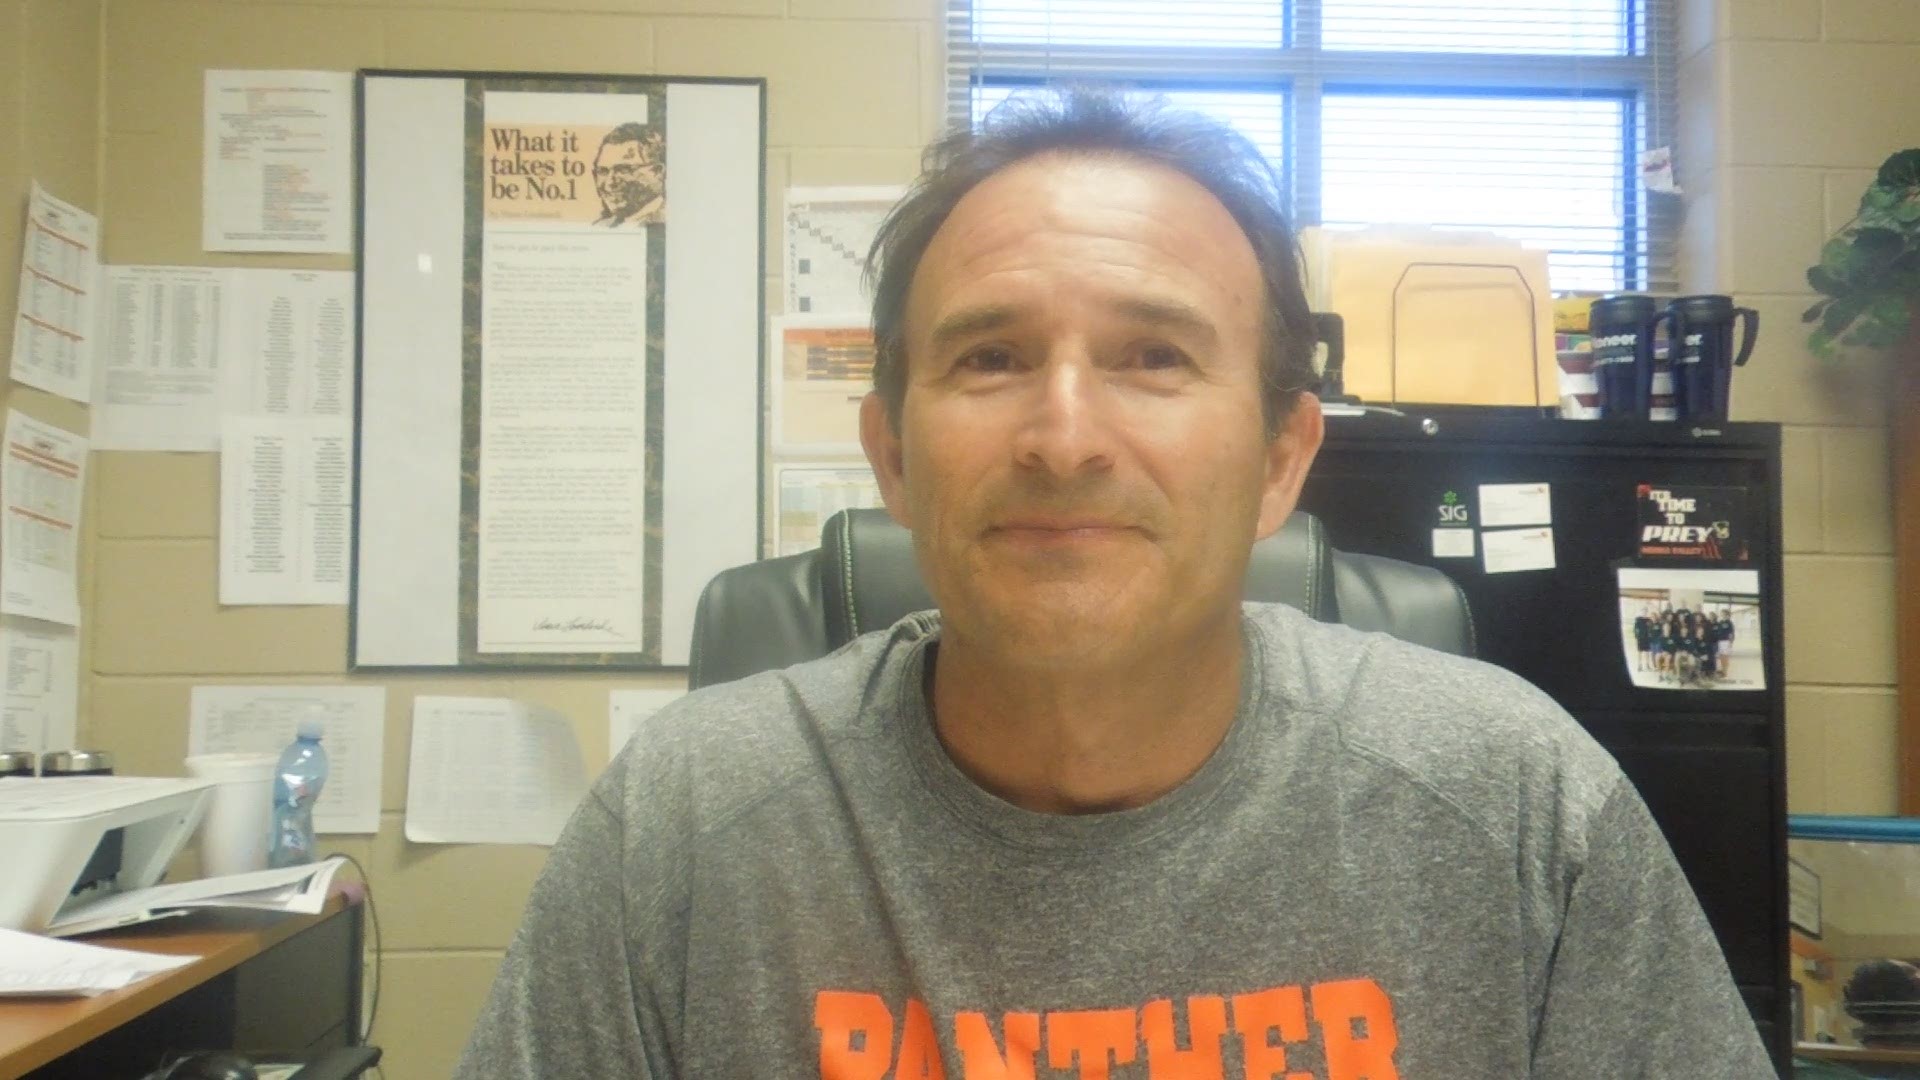 Medina Valley coach Chris Soza on the outlook for the Panthers this season